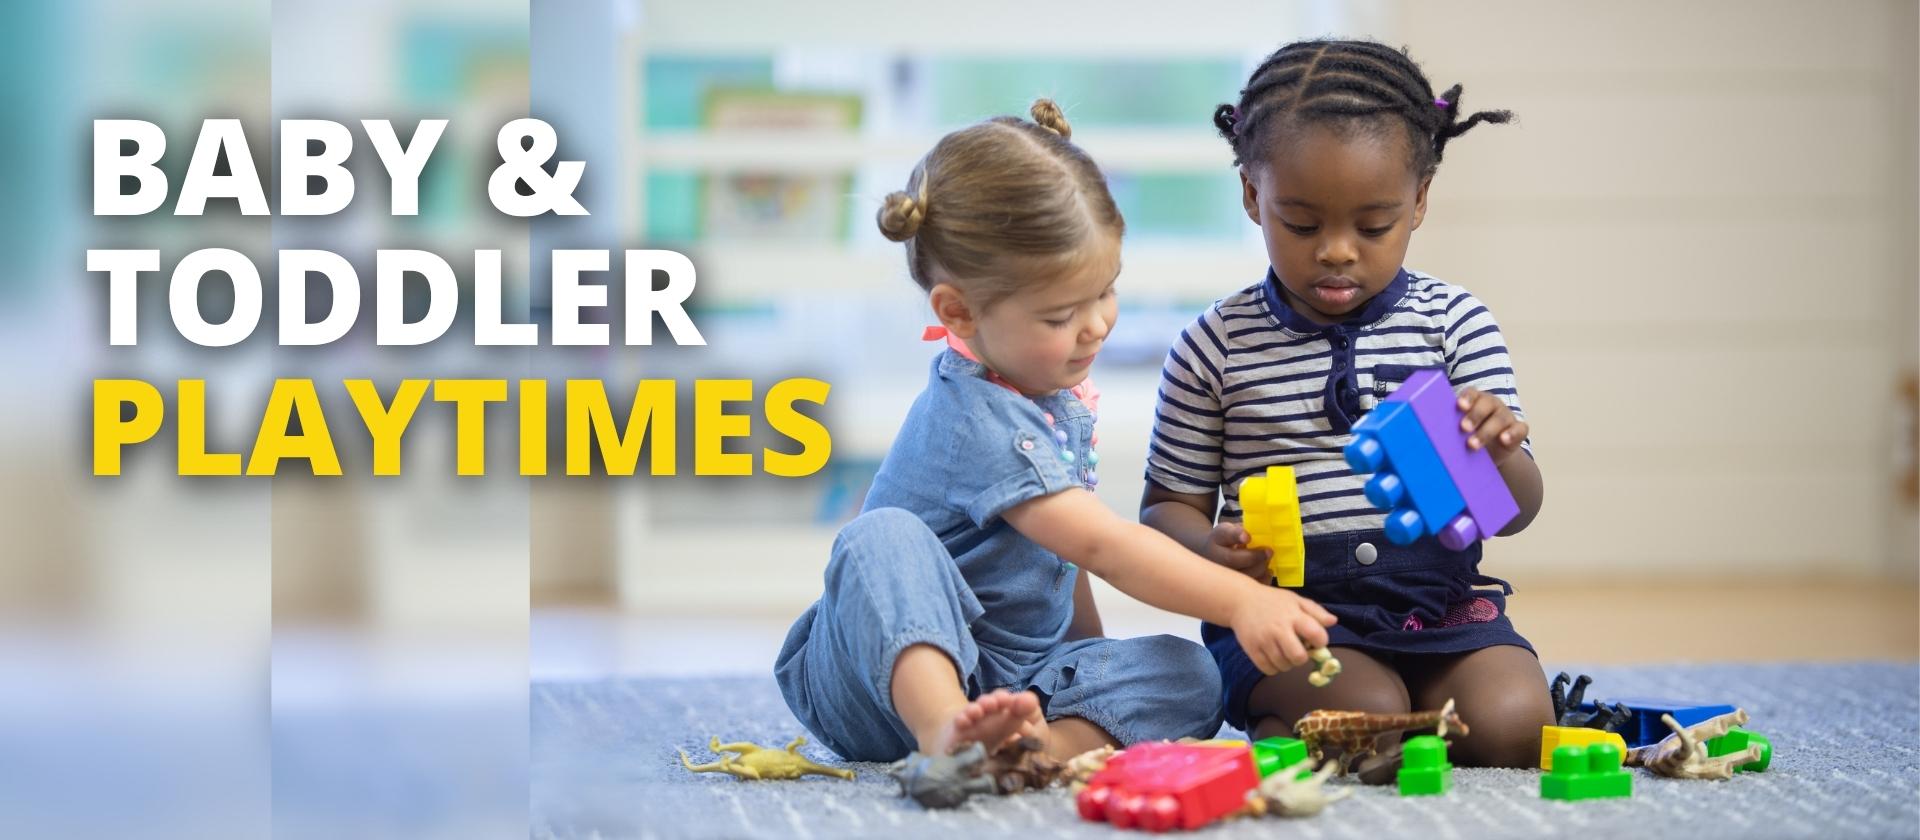 Atherstone leisure complex baby and toddler playtime sessions